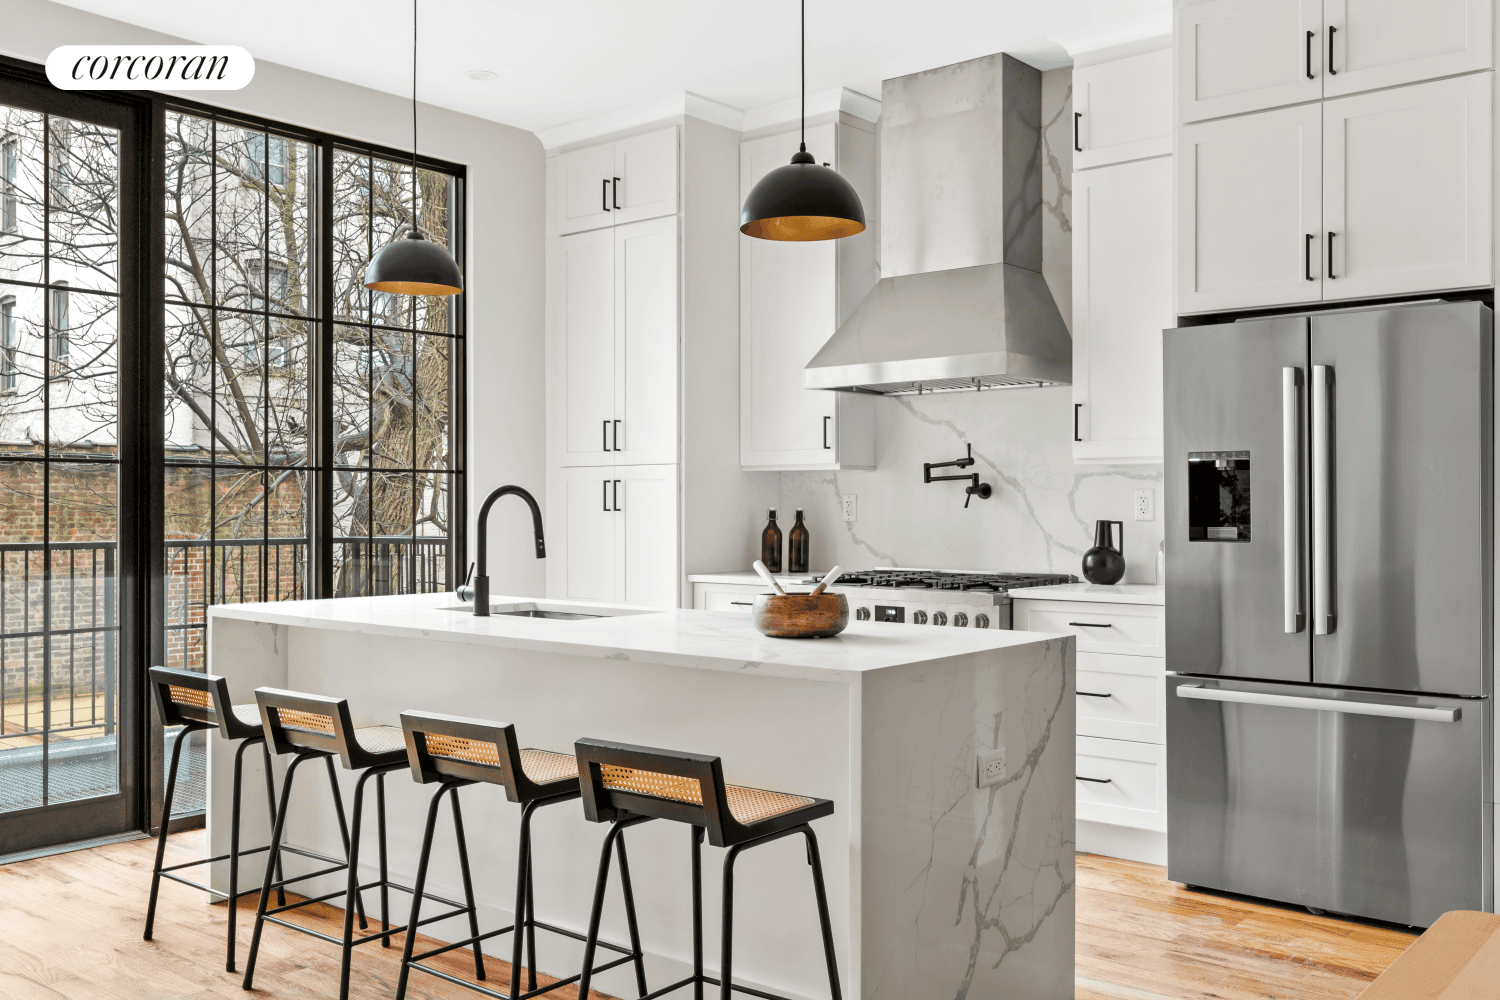 Be the first to inhabit this exceptional, fully renovated triplex nestled within a townhouse in the thriving north section of Crown Heights.